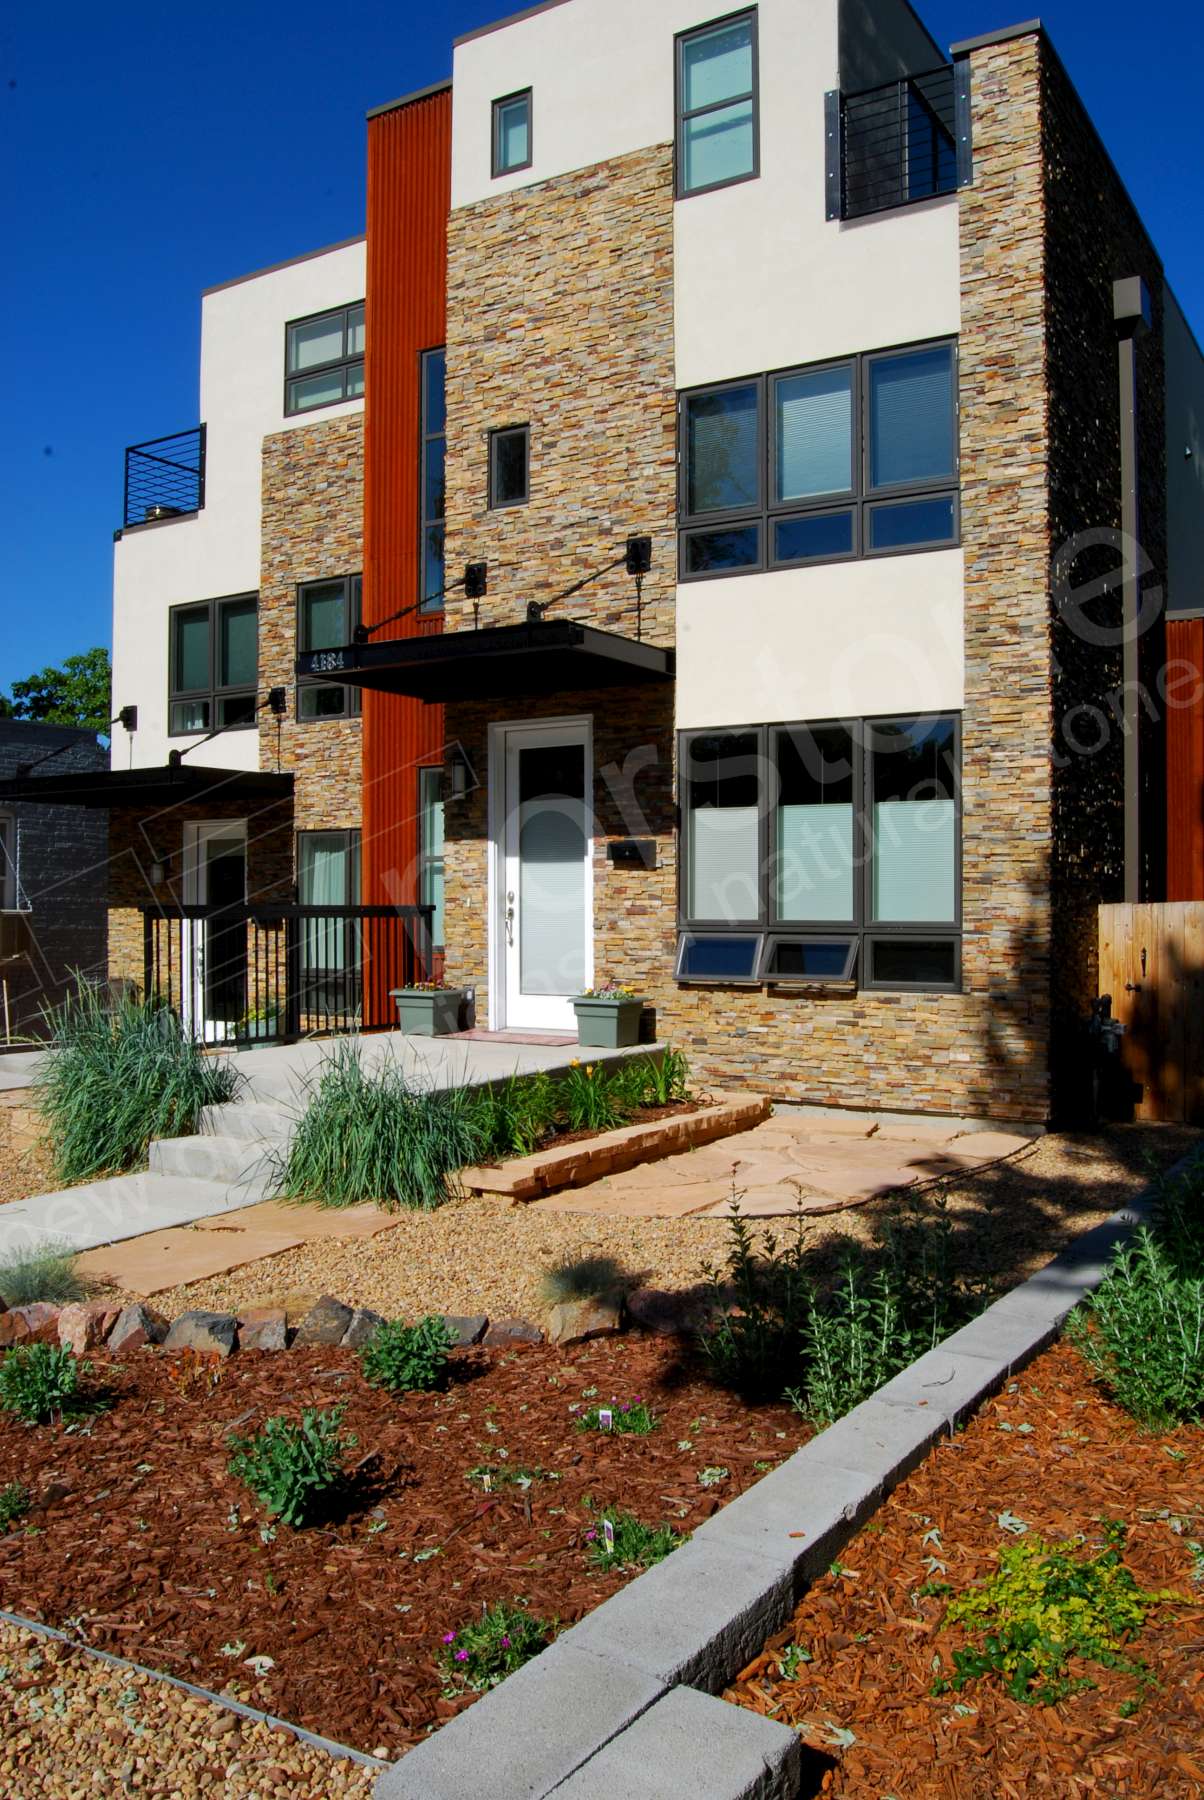 Norstone Ochre Stacked Stone Rock Panels used on the facade of a three story residential duplex